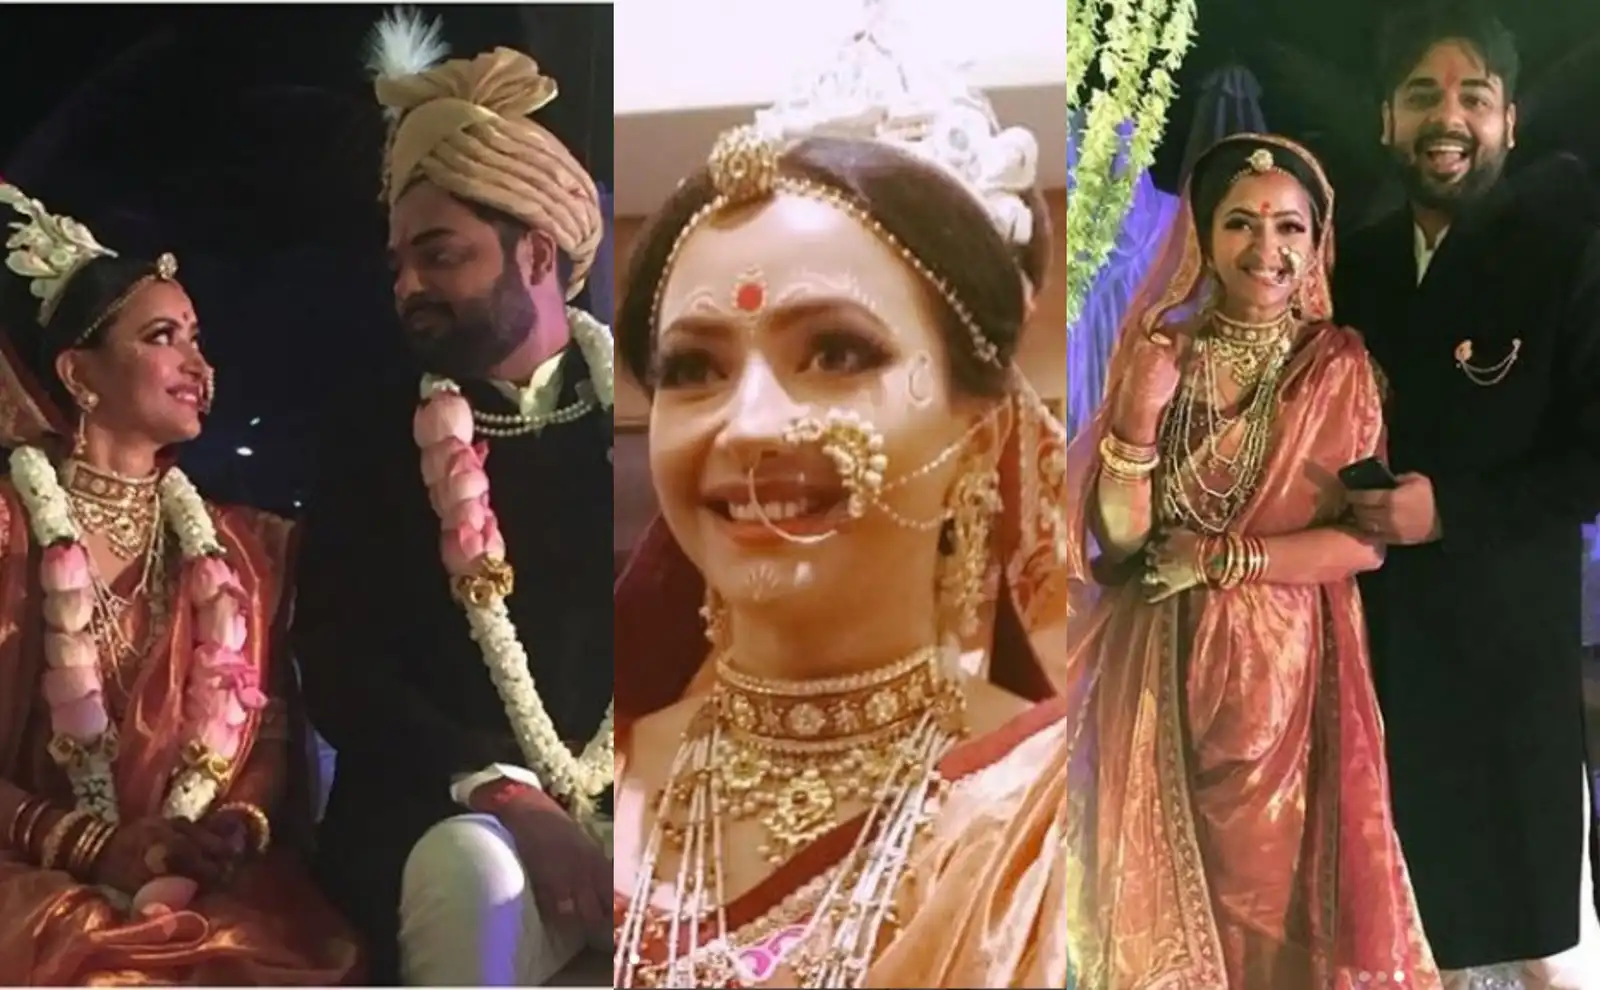 In Videos And Pictures: Chandra Nandini Actress Shweta Basu Prasad Looks Beautiful As A Bengali Bride!